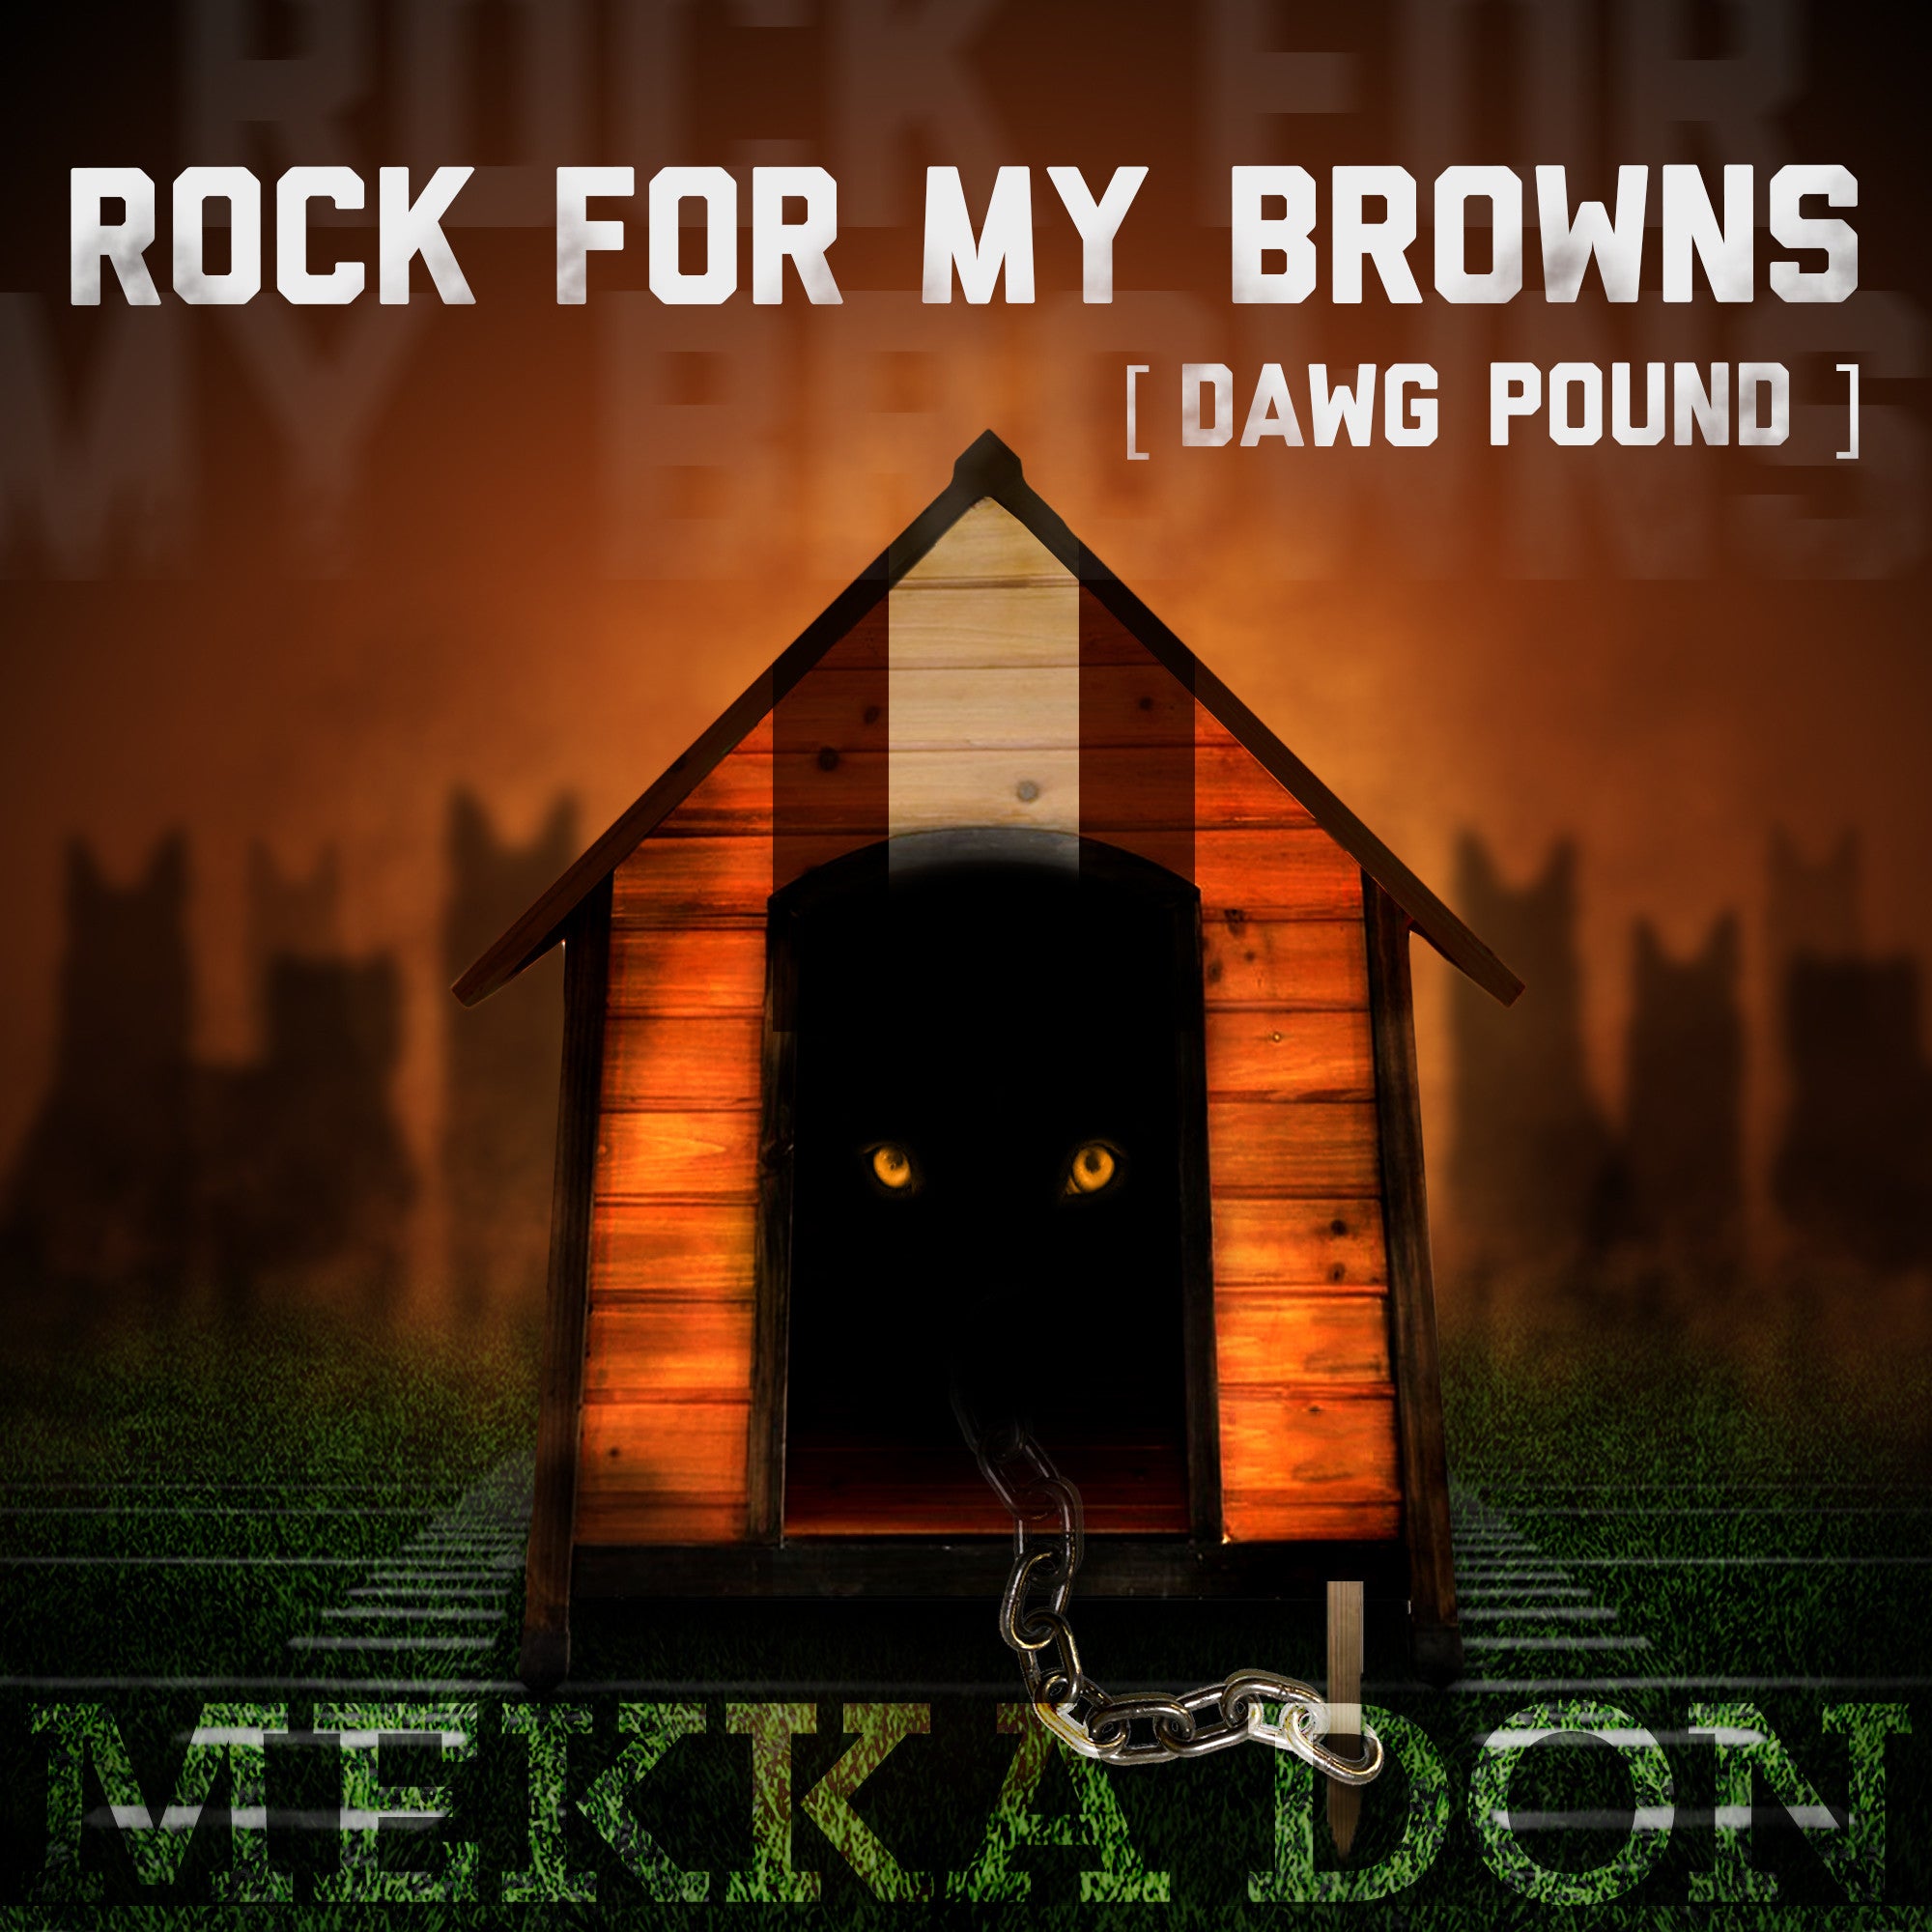 "ROCK FOR MY BROWNS (DAWG POUND)"